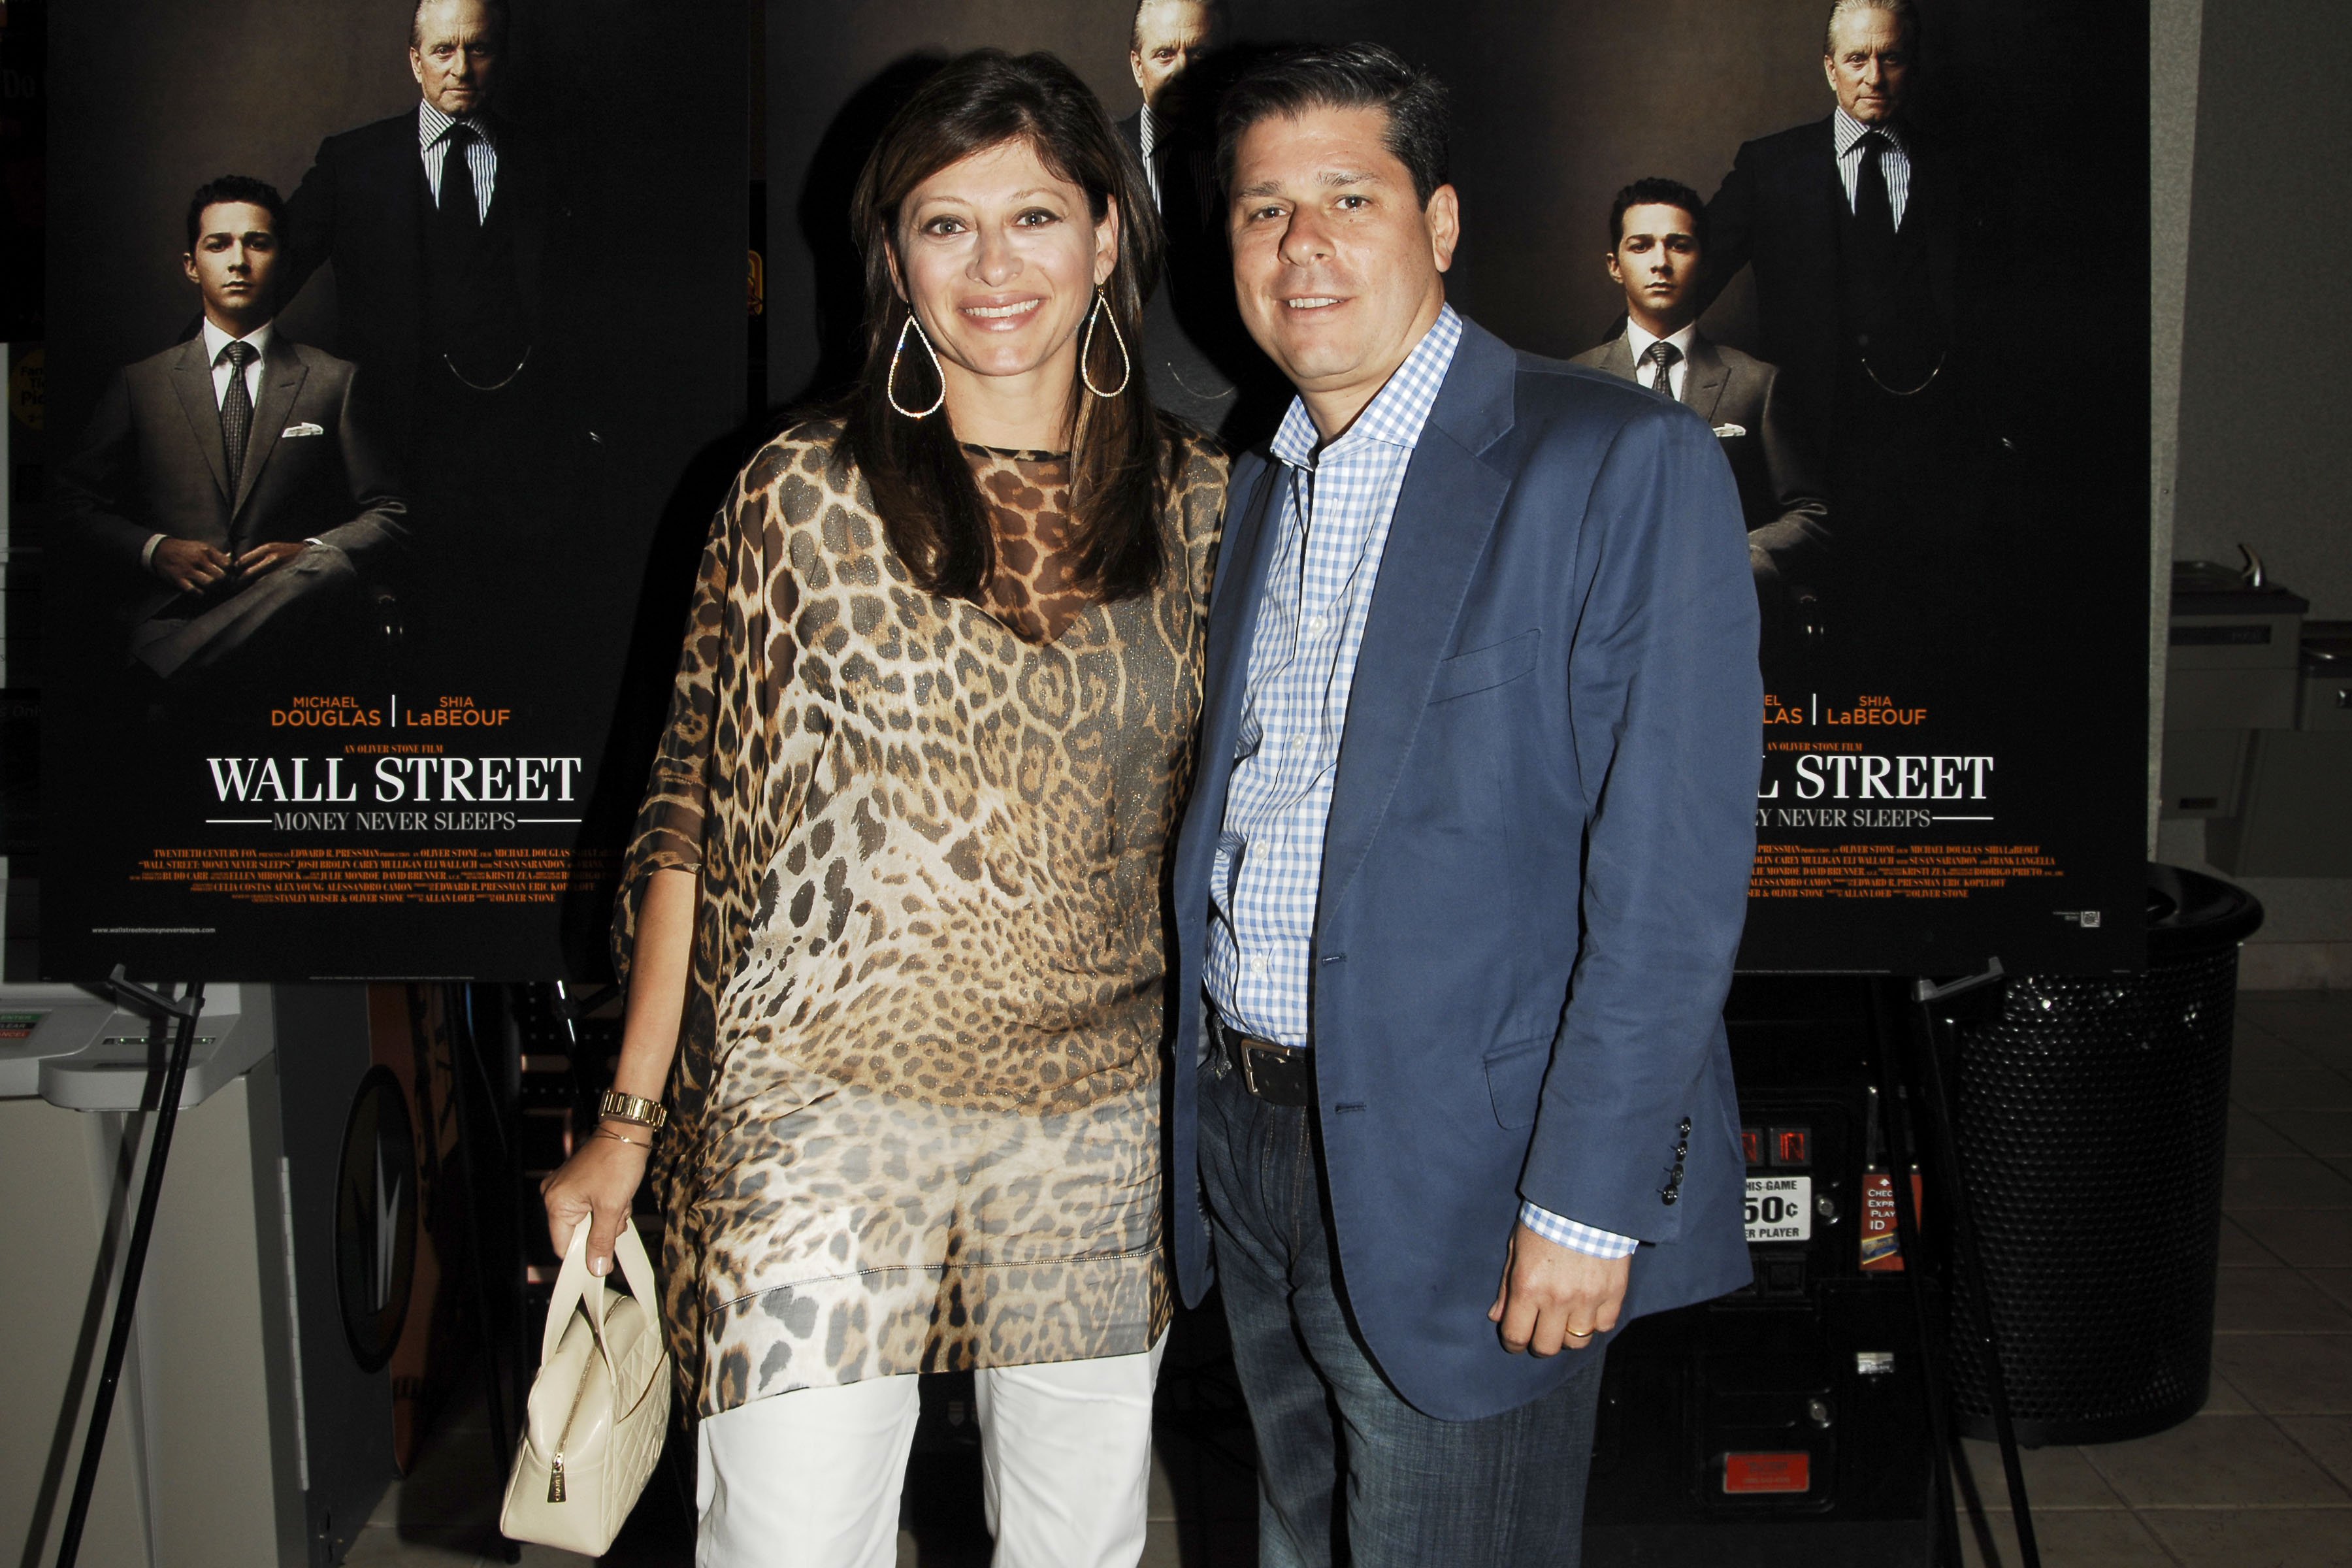 Maria Bartiromo and Jonathan Steinberg attend the "Wall Street: Money Never Sleeps" screening at UA Theaters on August 22, 2010, in South Hampton, New York. | Source: Getty Images